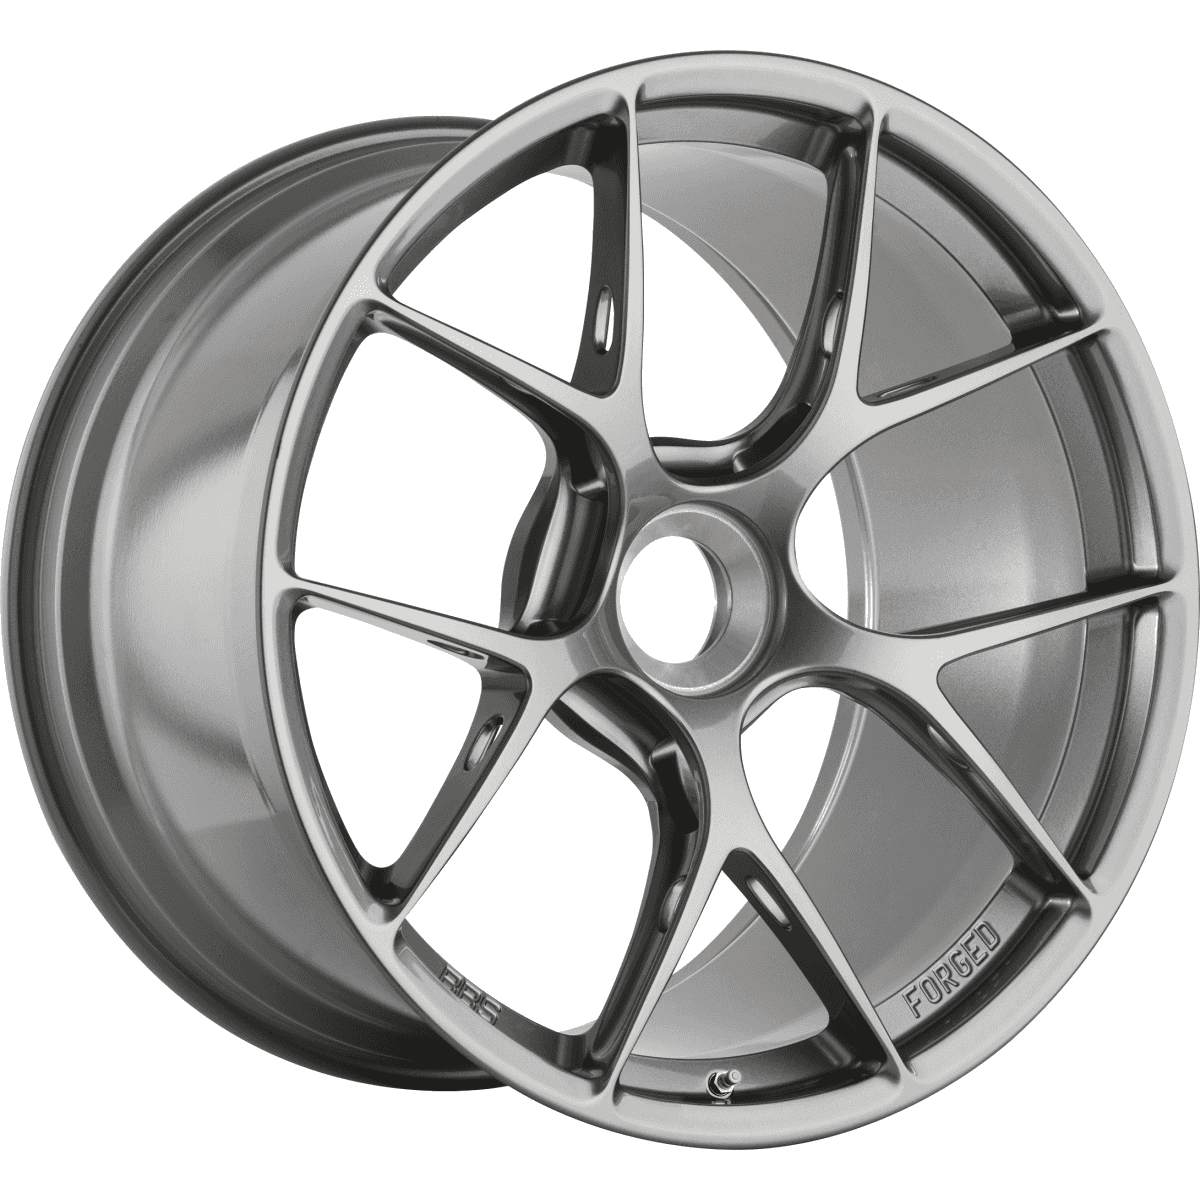 BBS FI-R (Forged Individual Centre-Lock) with Speed Holes